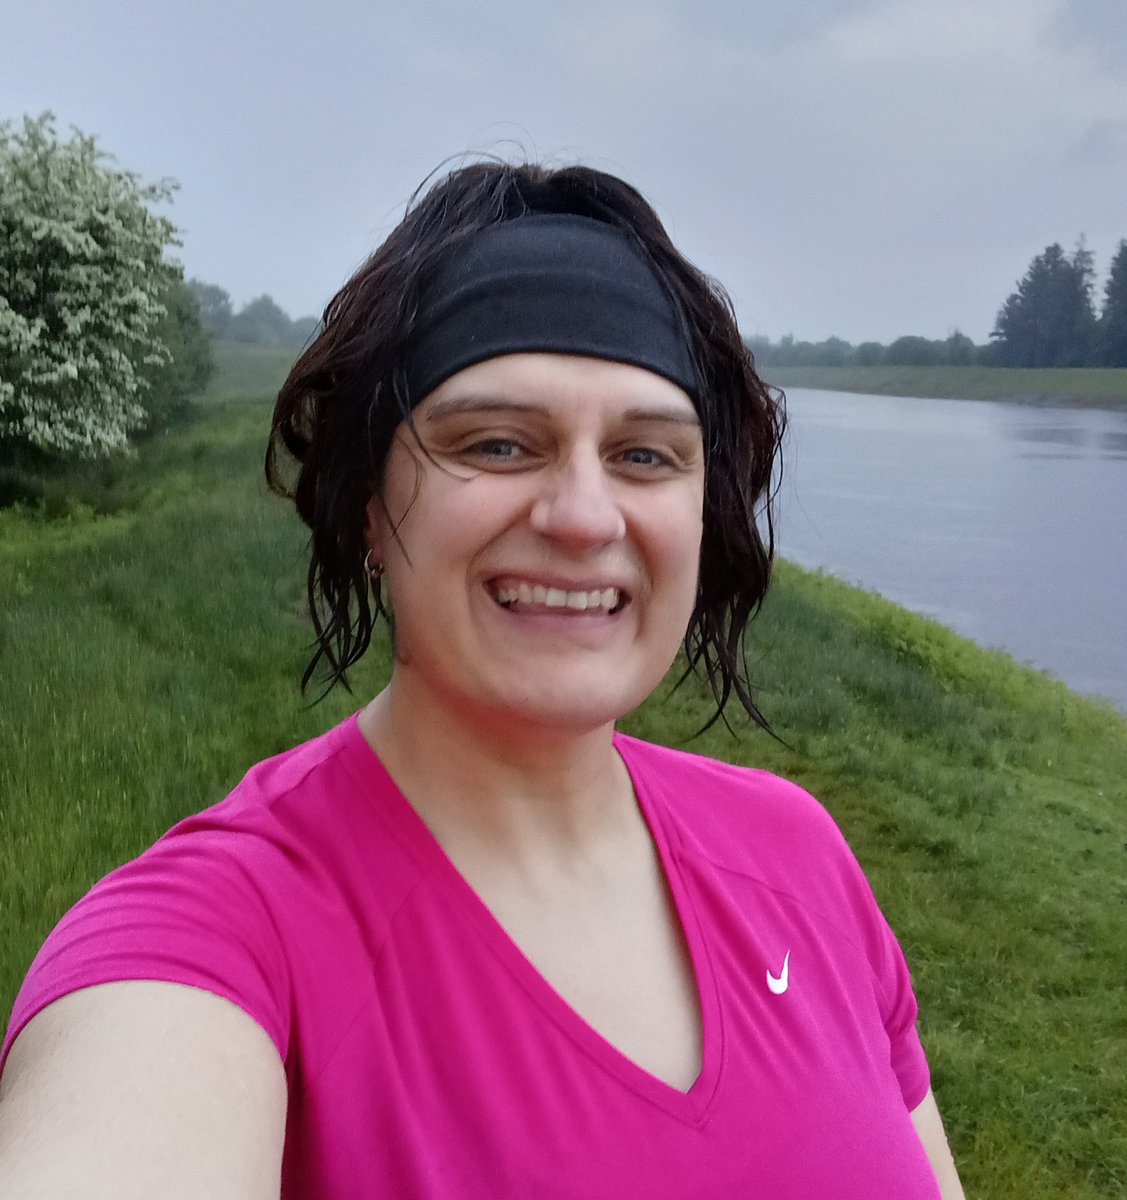 My first run in 20 months and it's during a #Thunderstorm I'm taking that as a good omen! Still rehabbing a back injury and that wasn't entirely pain-free but it was 15 minutes of pure joy! ❤️ #Running #ChronicPain #ExerciseIsMedicine